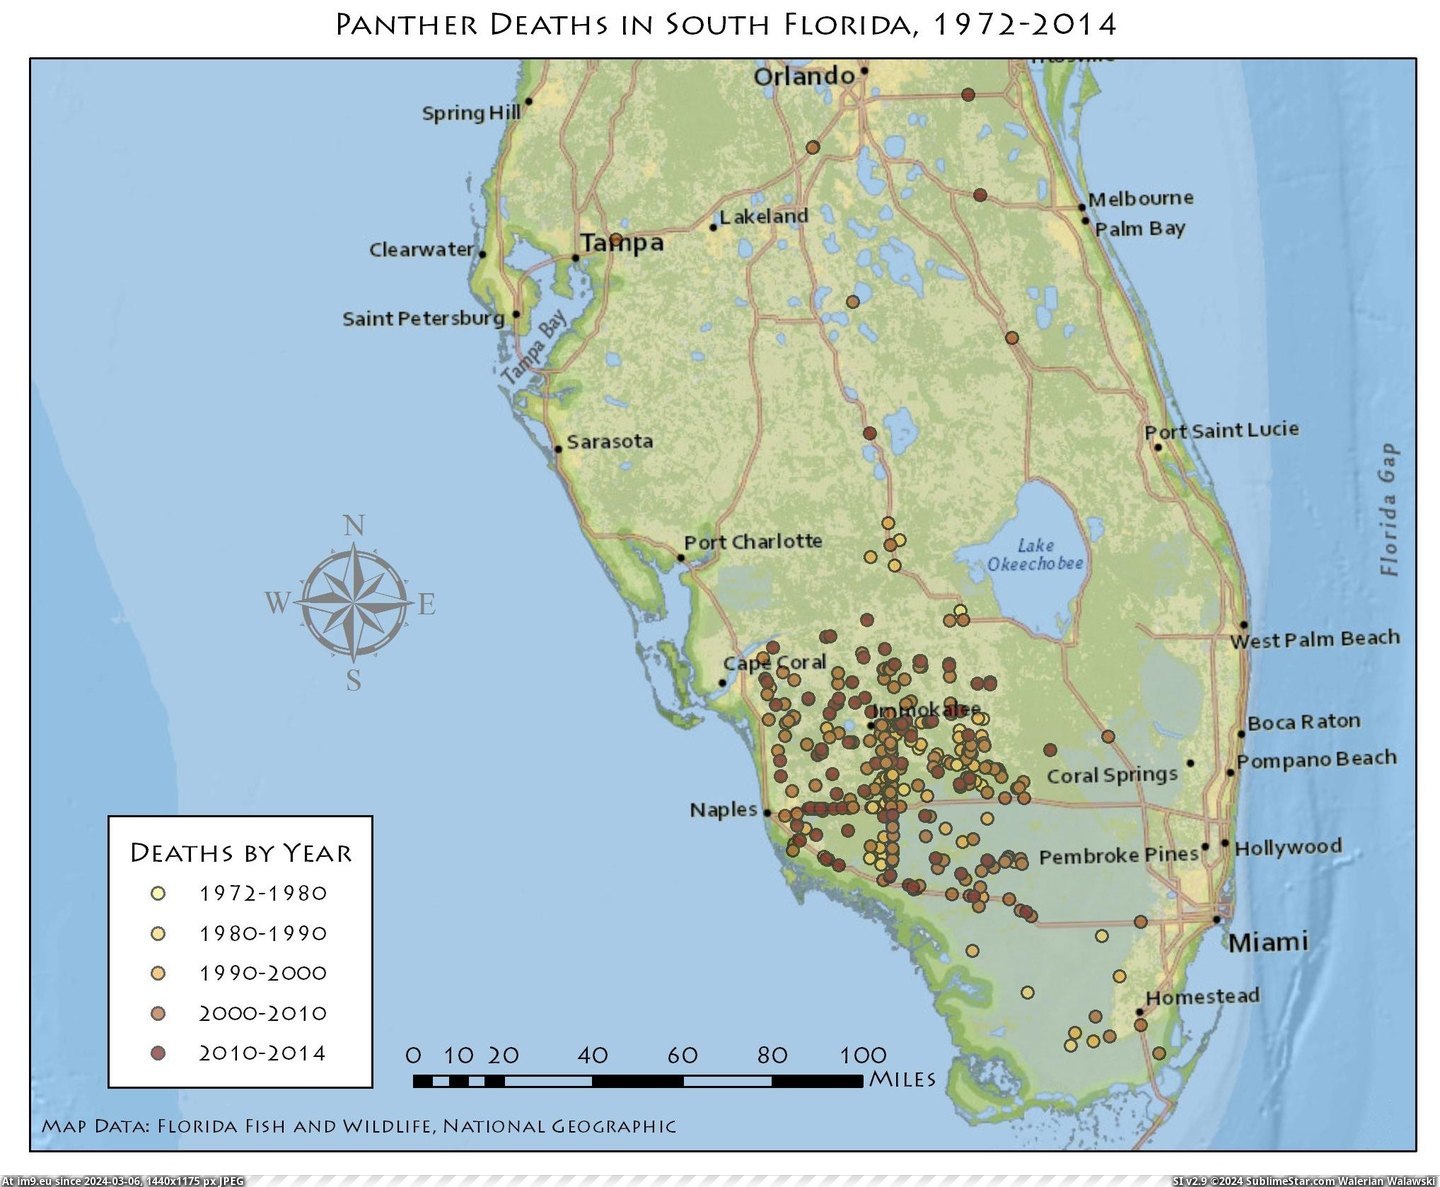 #Florida #Deaths #Panther [Mapporn] Panther Deaths in Florida, 1972-2014 Pic. (Image of album My r/MAPS favs))